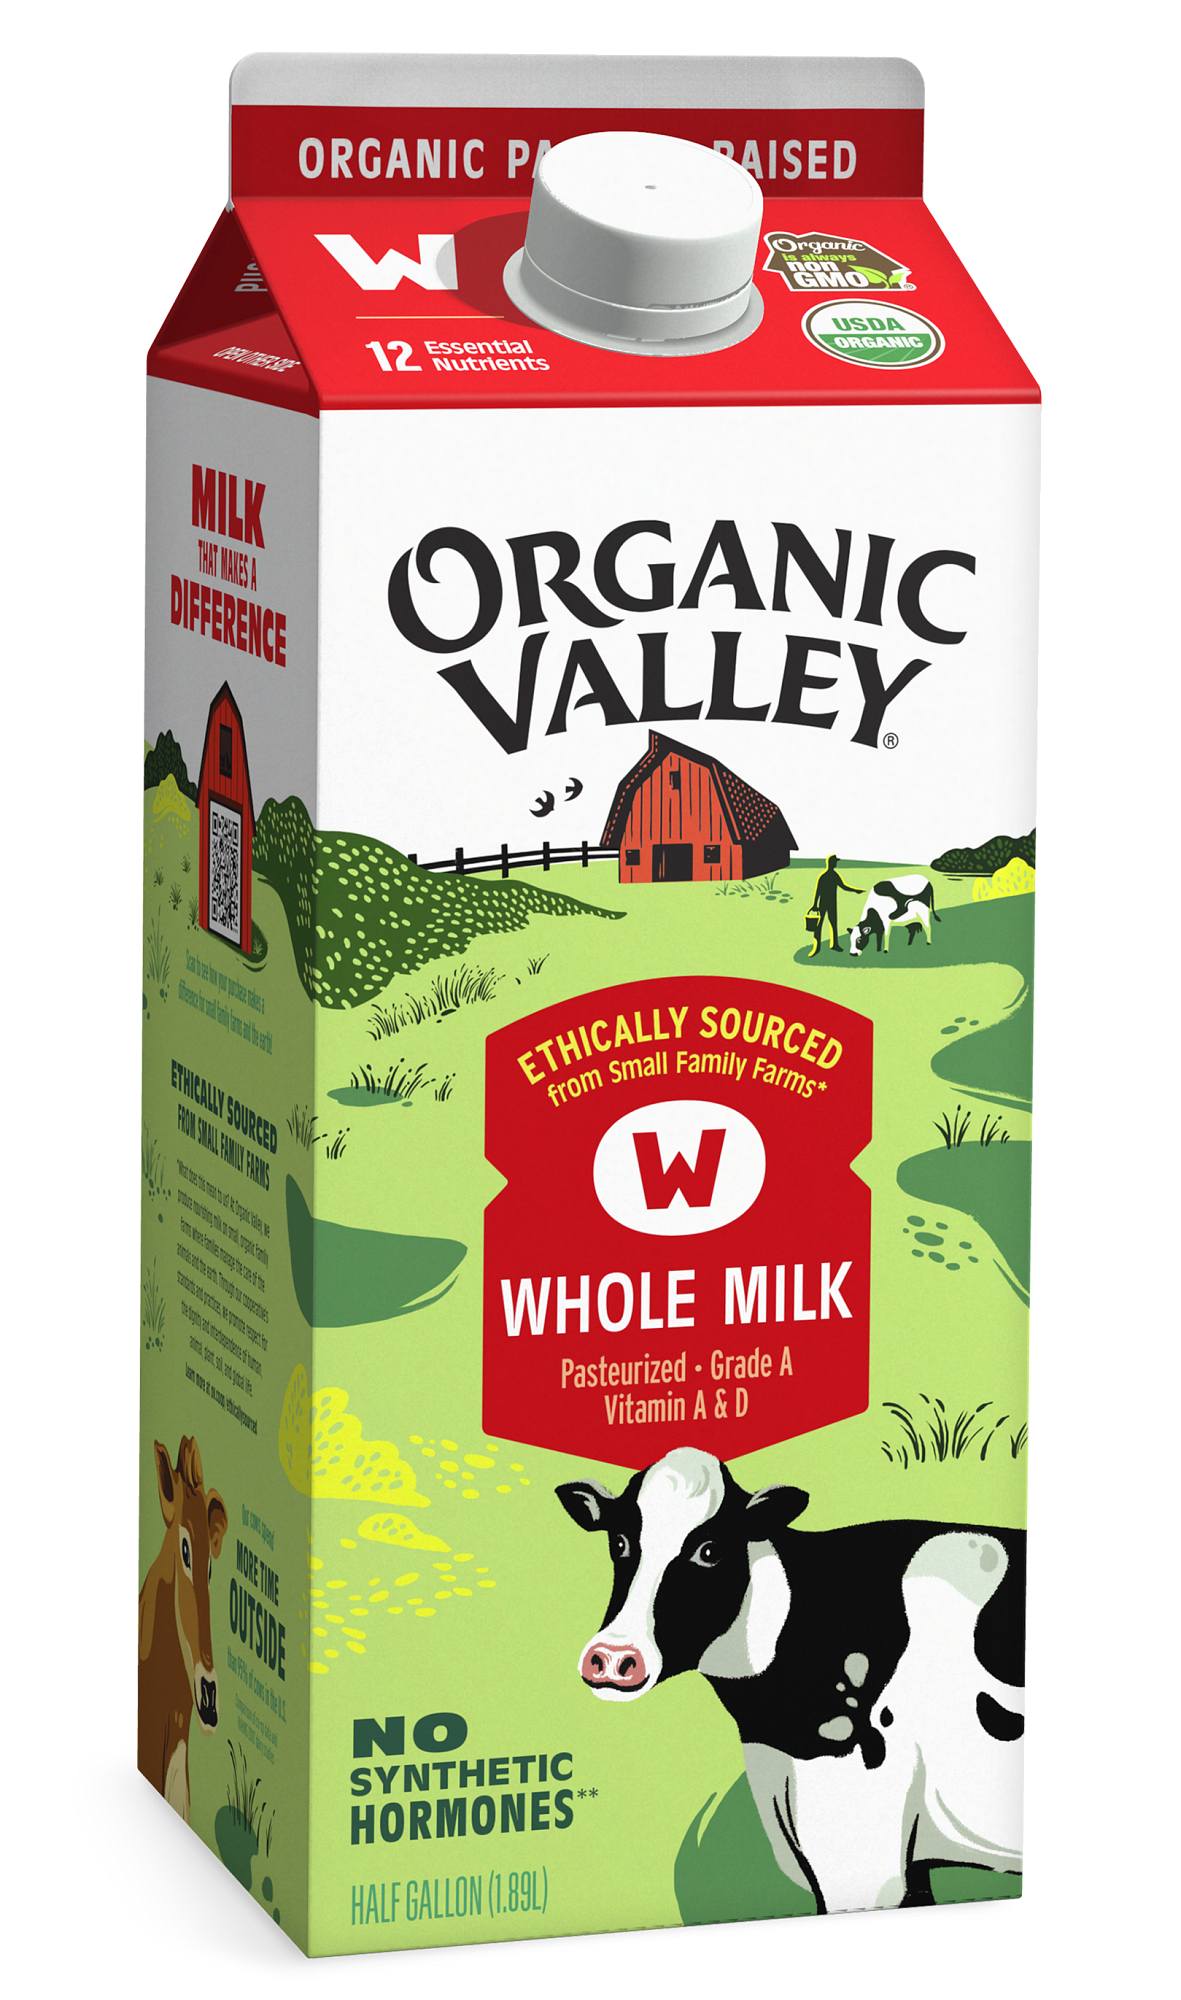 Home  Ethically Sourced From Small Organic Family Farms